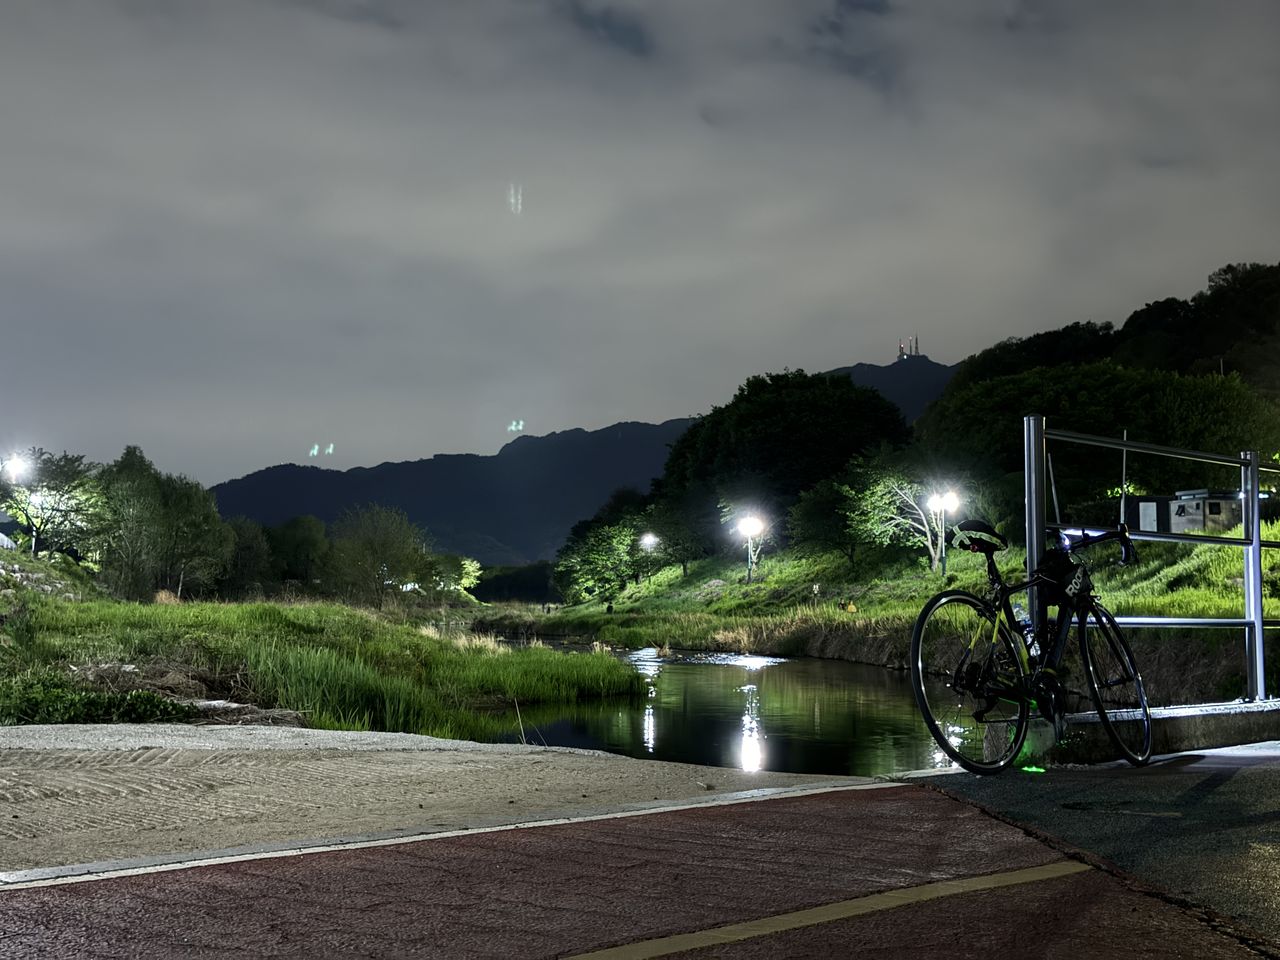 sky, cloud, night, bicycle, nature, tree, water, transportation, plant, no people, mountain, illuminated, scenics - nature, architecture, light, environment, beauty in nature, morning, outdoors, tranquility, street, land, road, tranquil scene, reflection, city